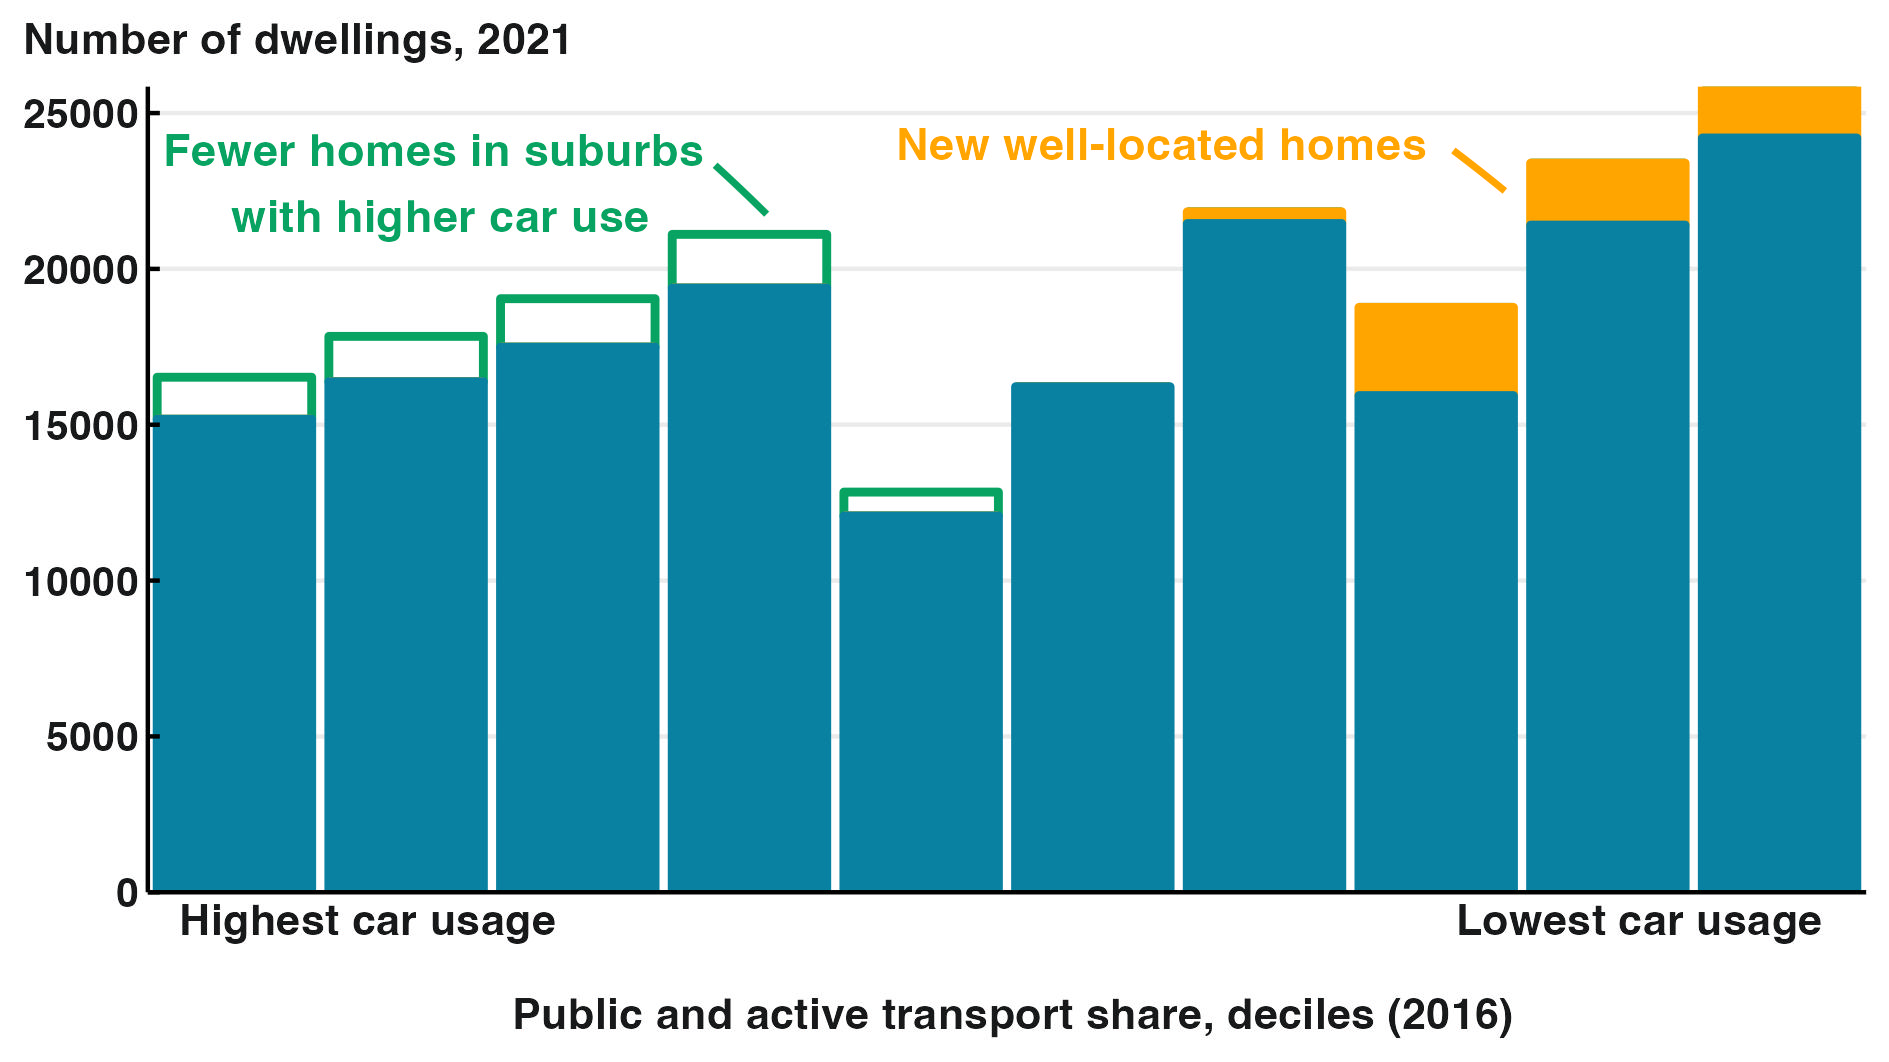 Chart showing distribution of total homes across deciles of public and active transport use. Under our scenario, fewer homes would be built in areas with low clean transport use, and more would be built in areas of high clean transport use.